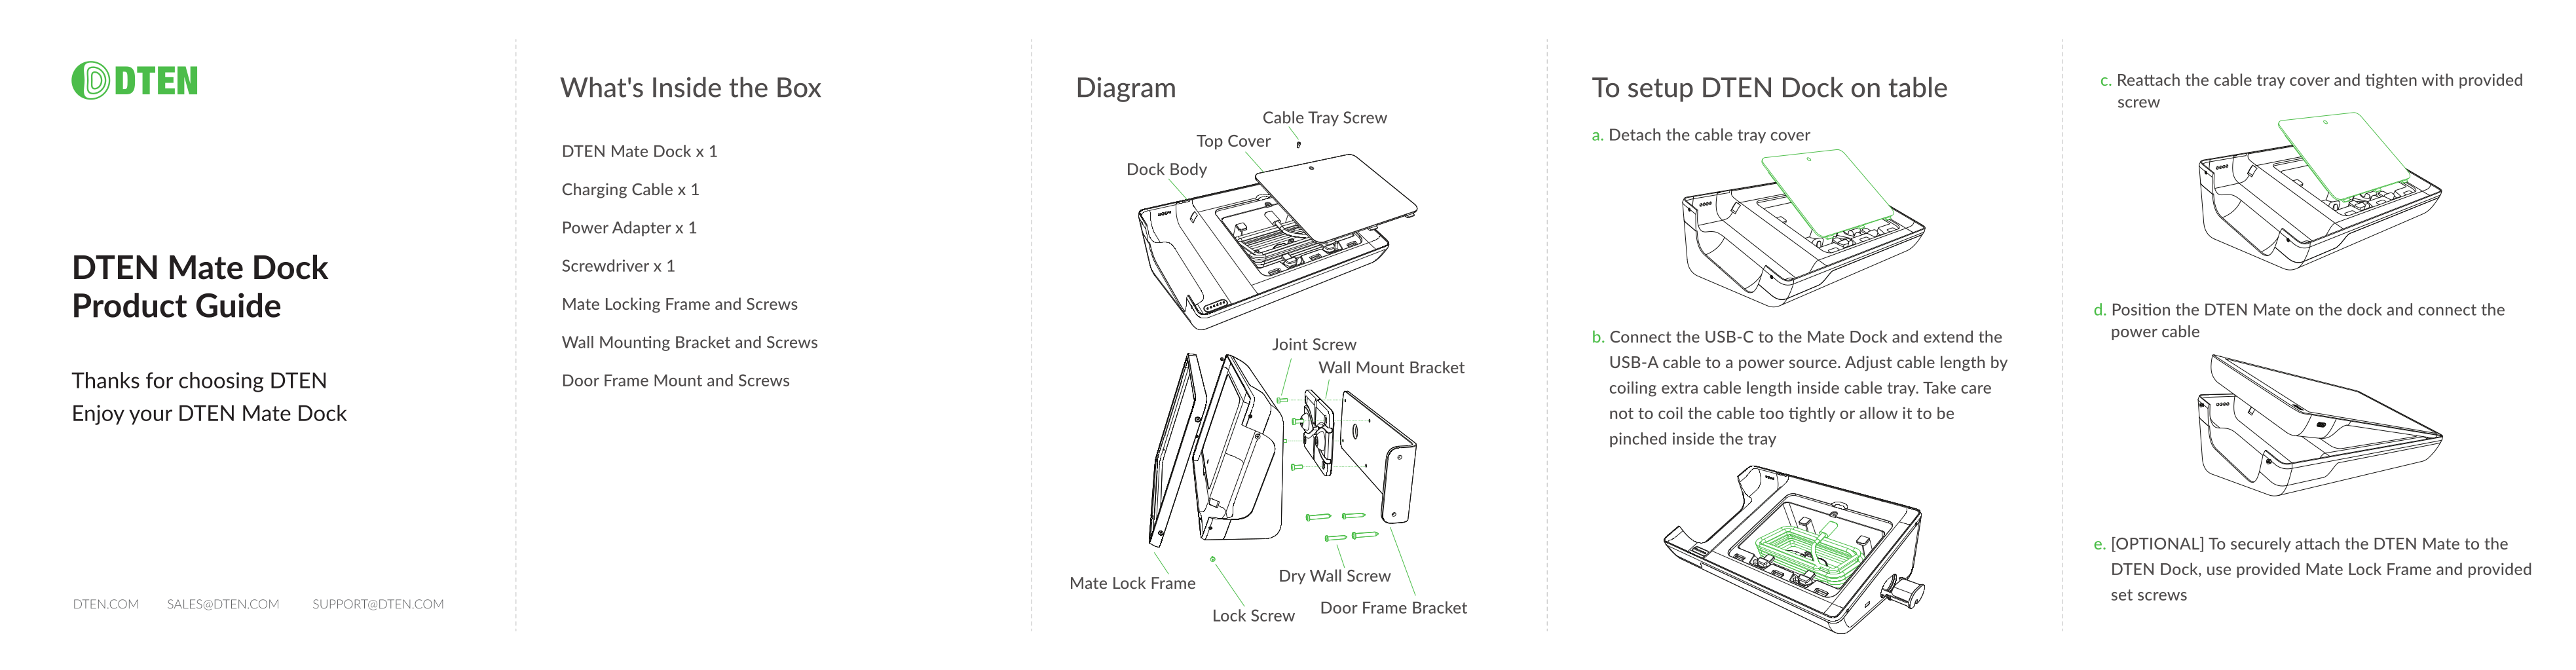 DTEN_Dock_Product_Guide_0083111.png